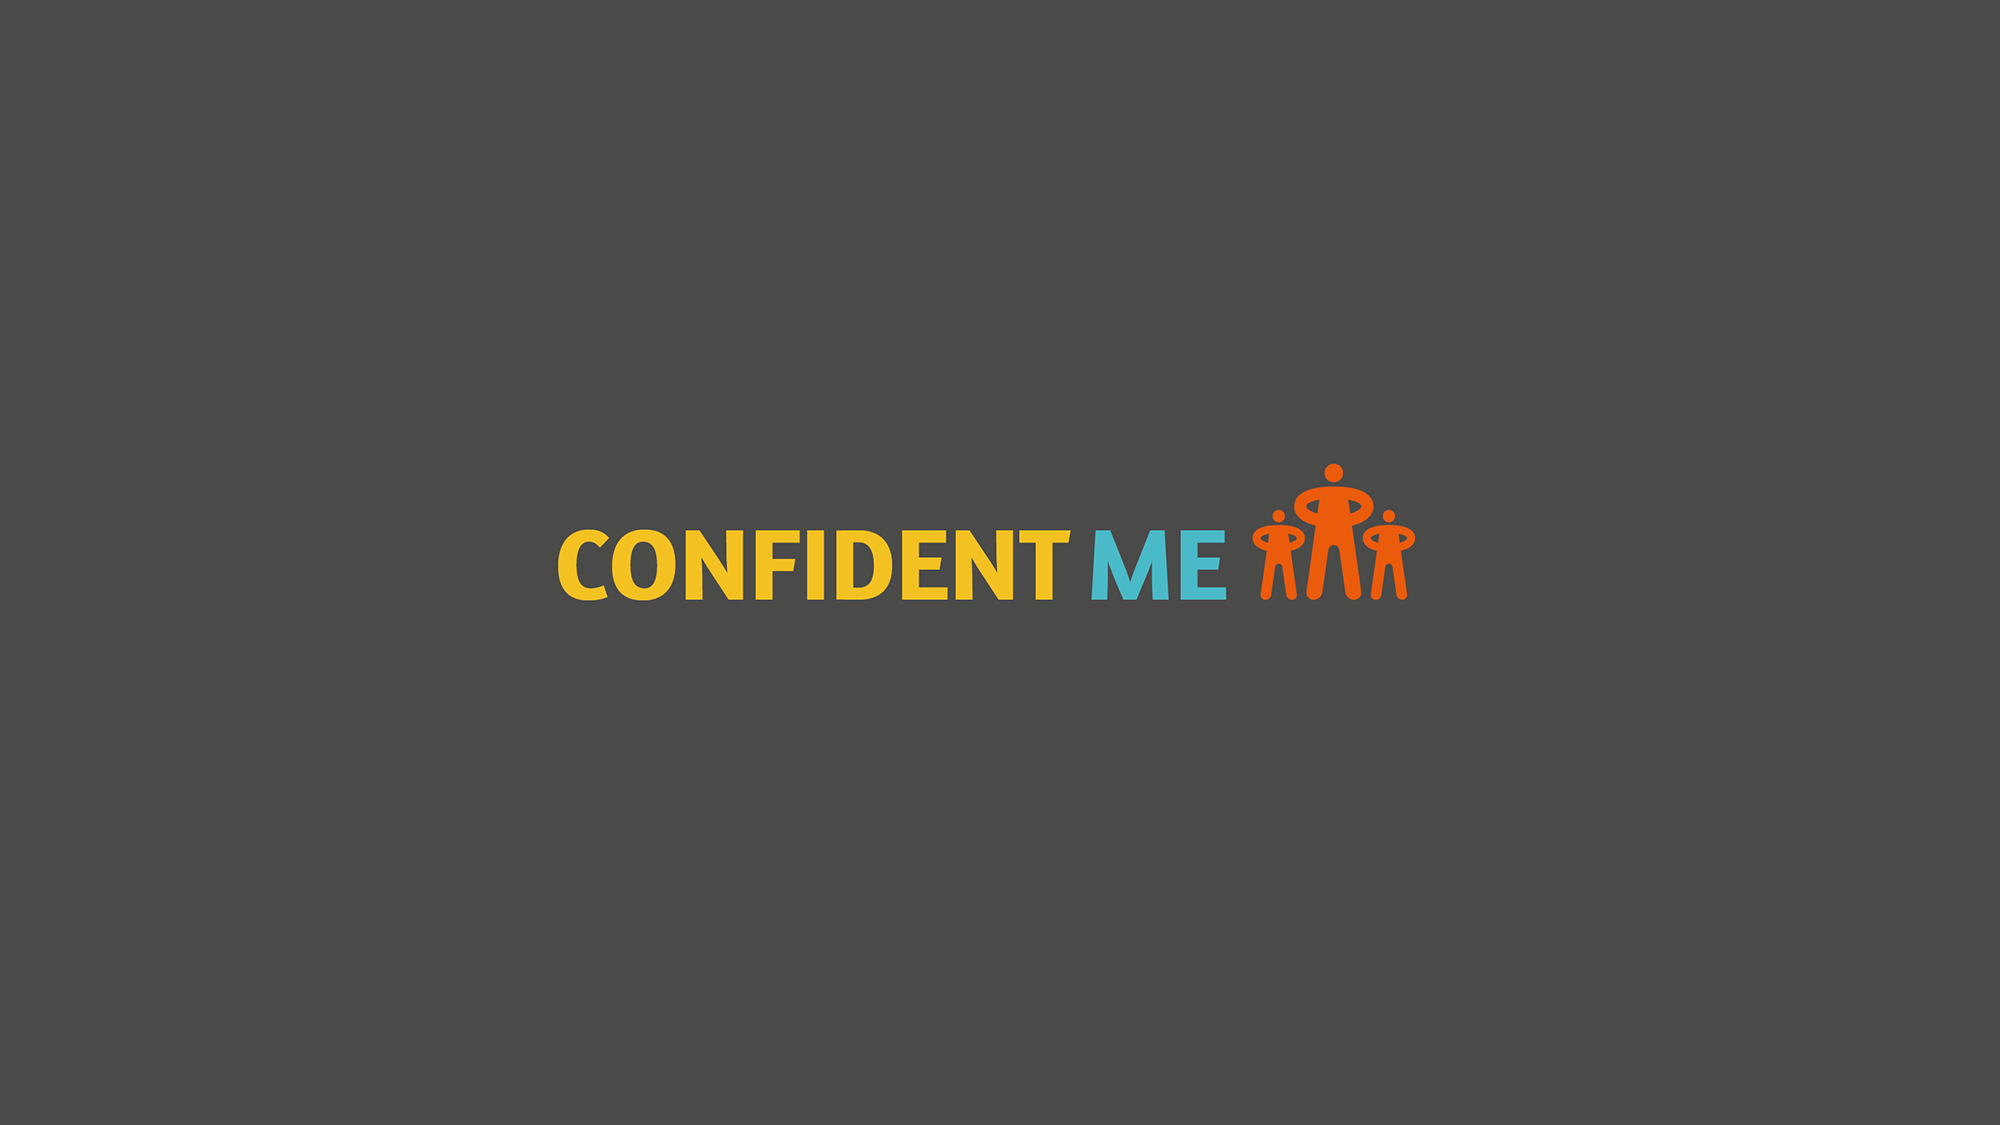 ConfidentME Week – How do I find a career that is right for me?